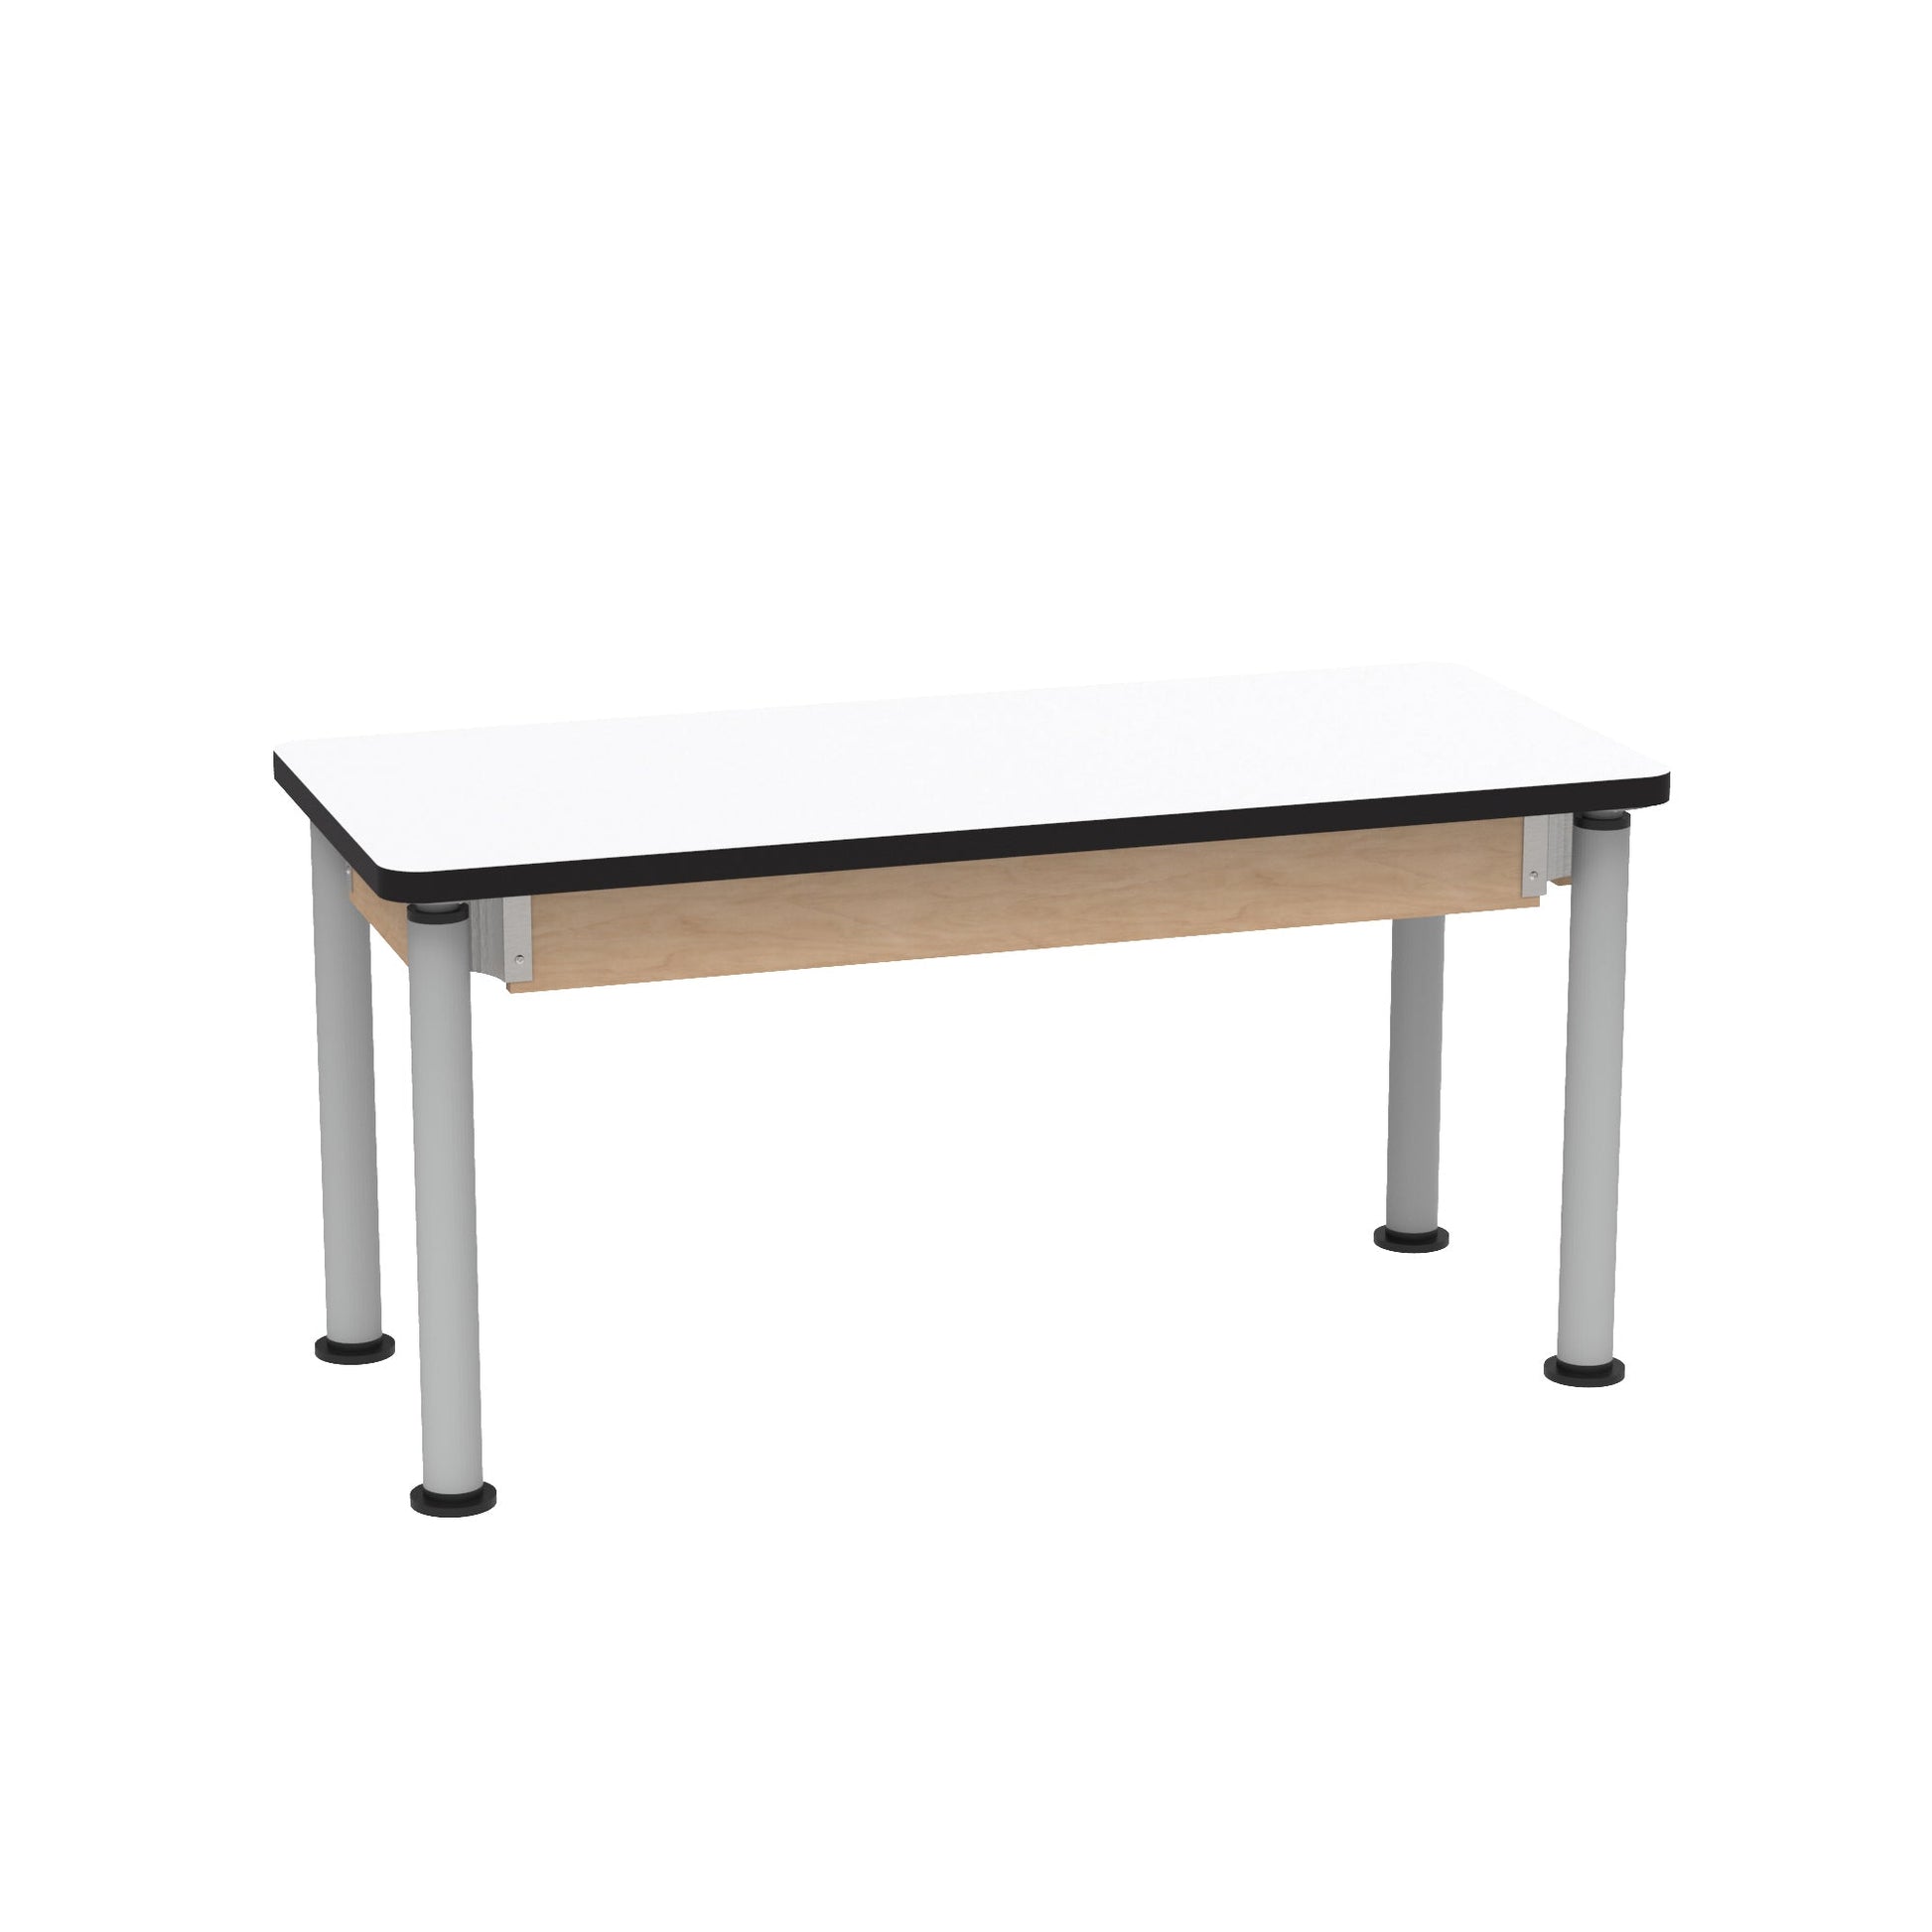 Diversified Woodcrafts Adjustable-Height Table - 54" W x 24" D - SchoolOutlet